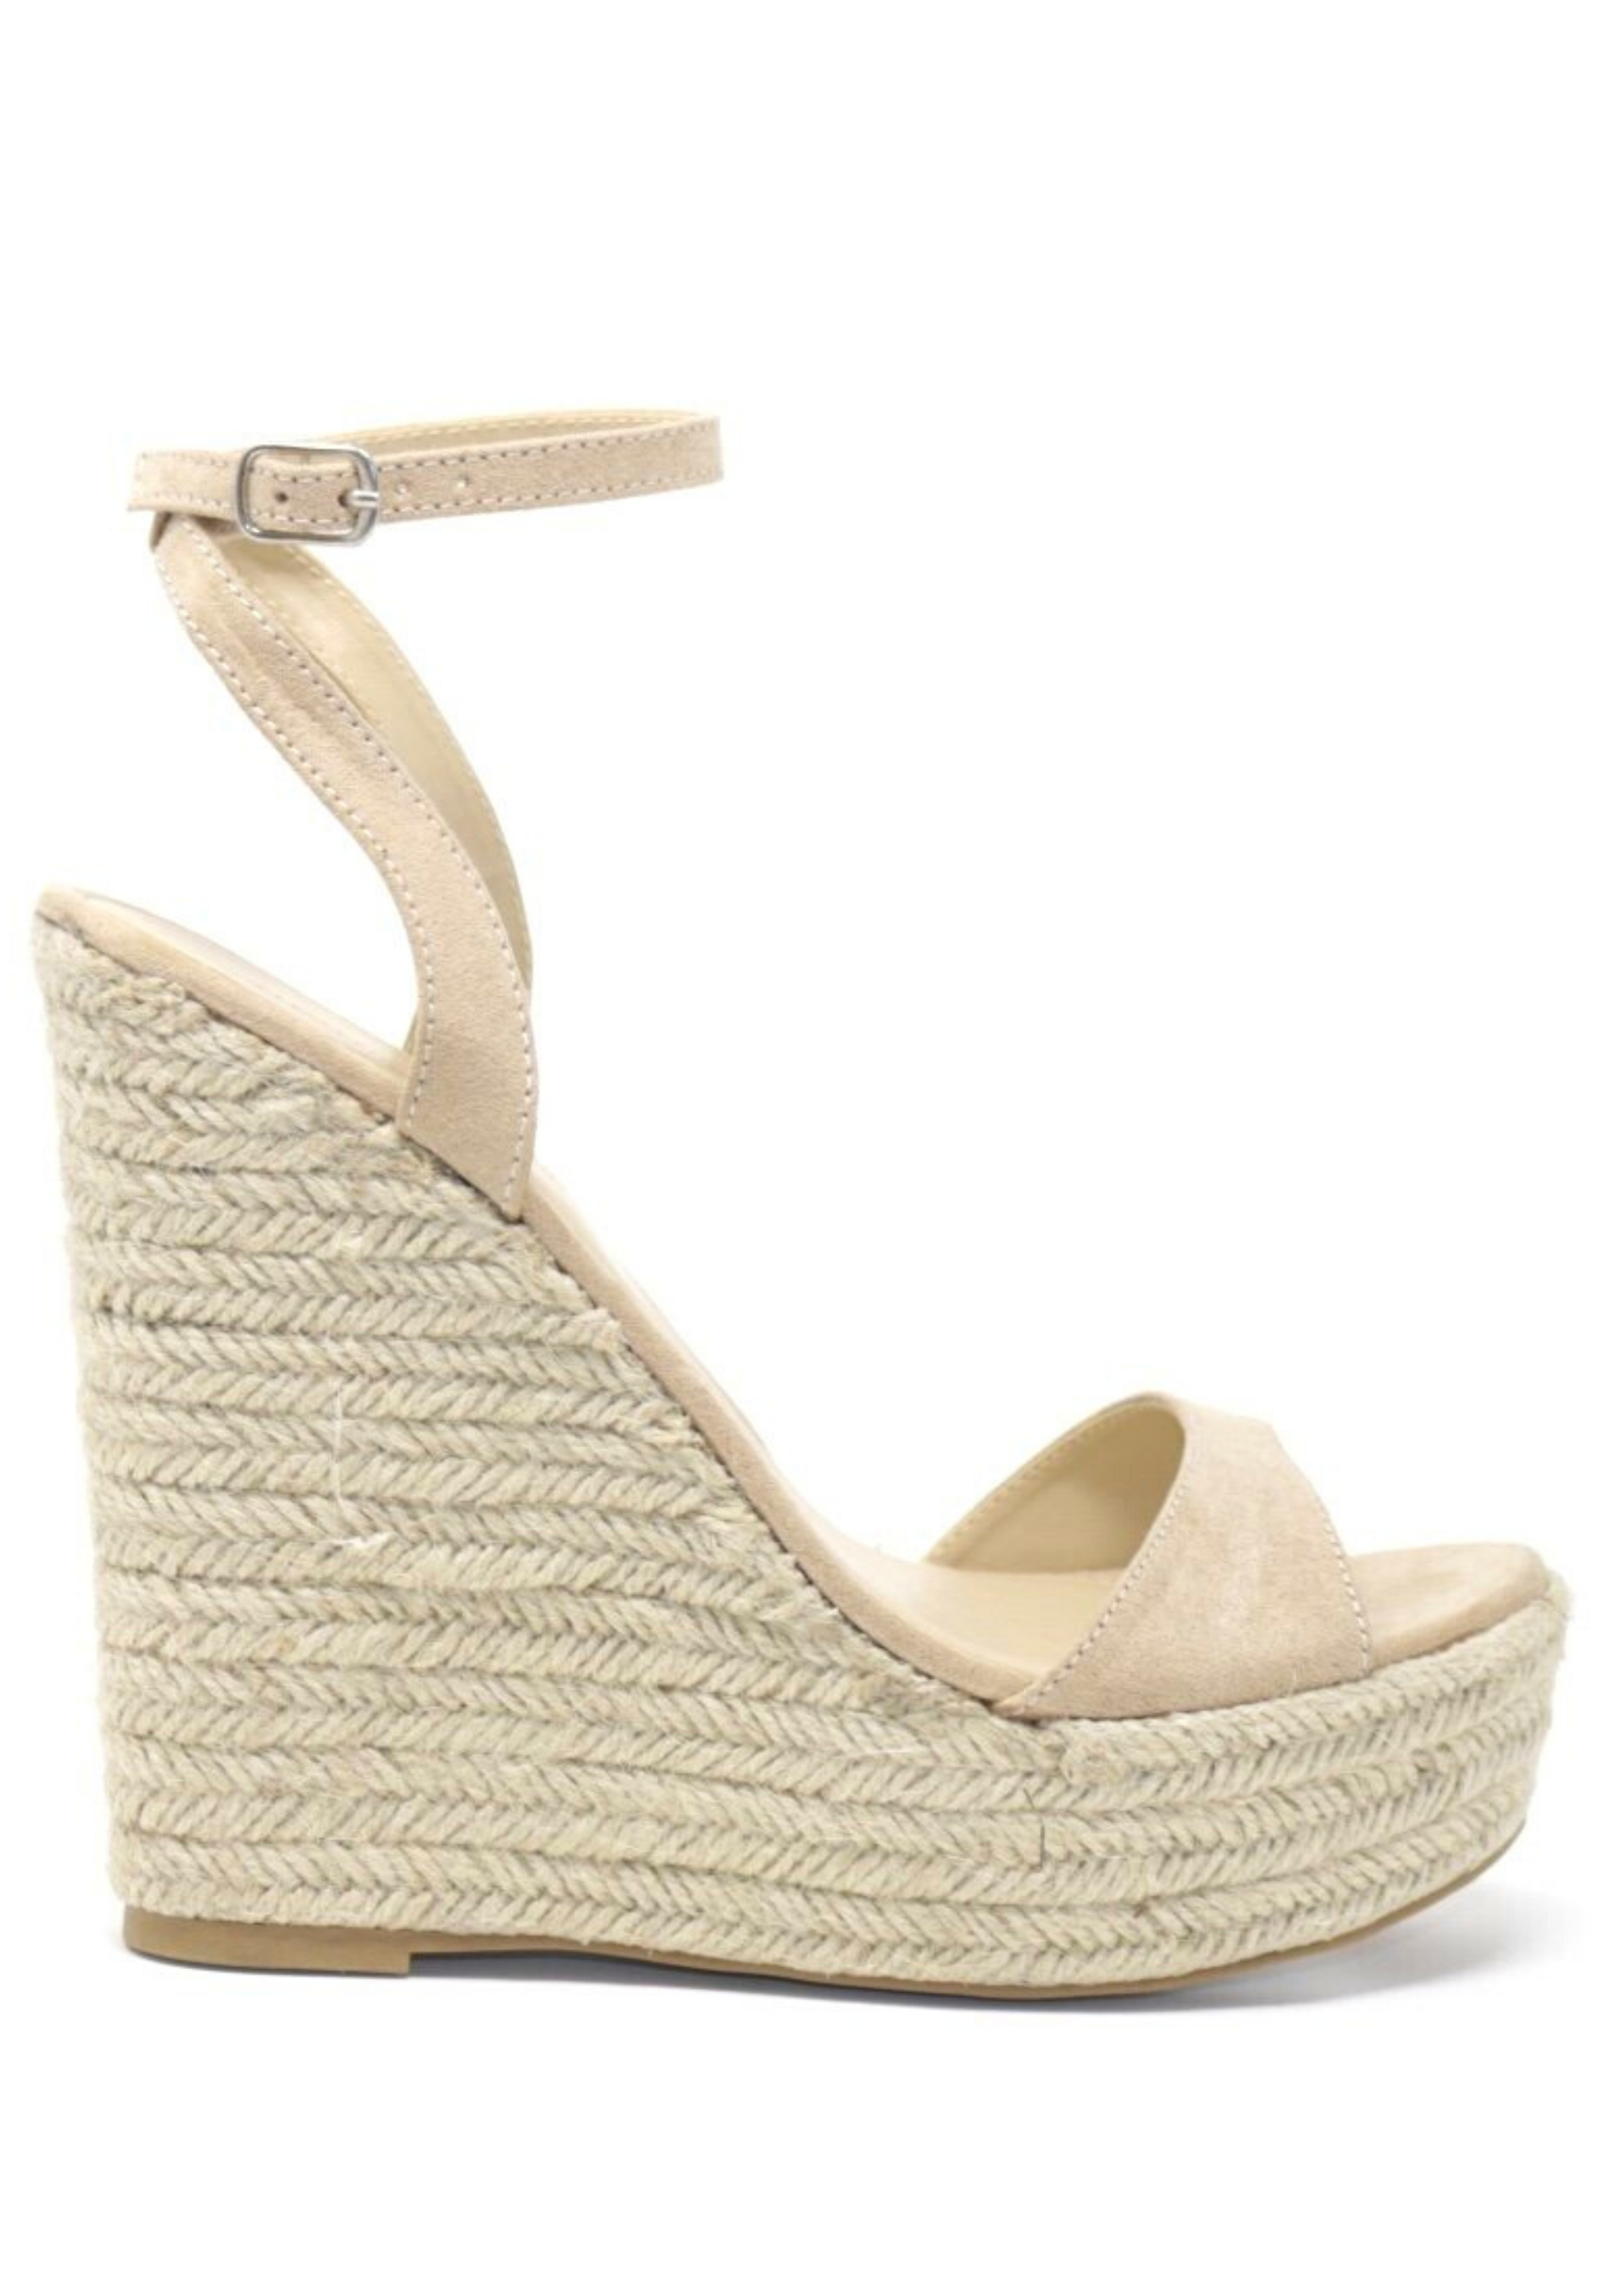 Nude suede ALYSSA wedge with espadrille wedge that crisscross strap that crosses in the back as the buckle buckles in the side that is silver. Thick to thin back to thick strap in the front.